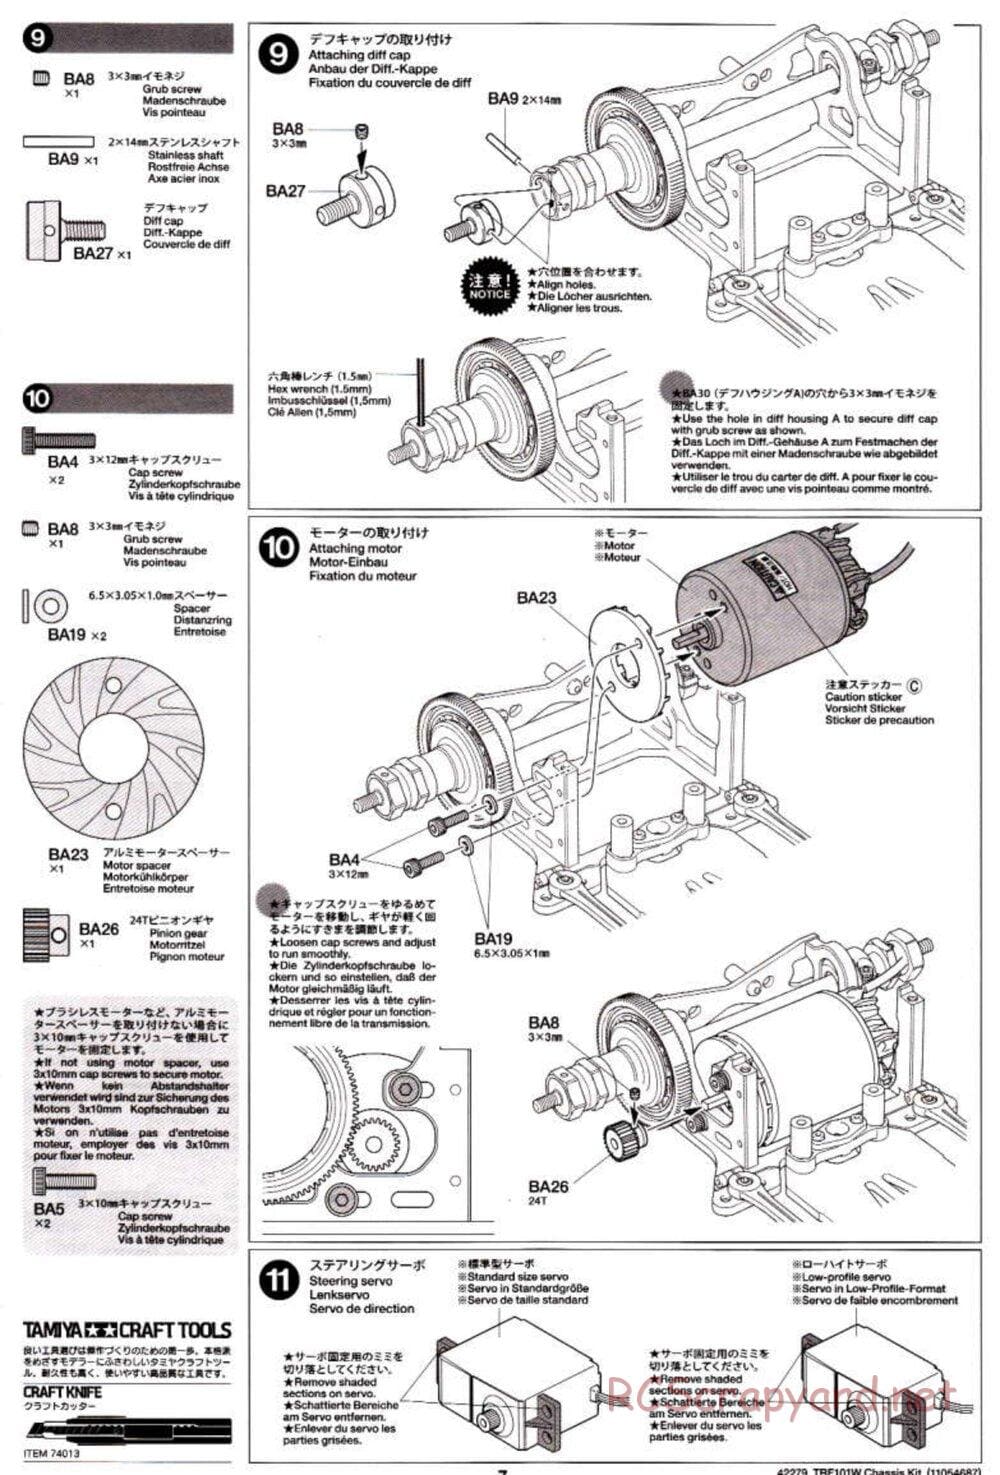 Tamiya - TRF101W Chassis Chassis - Manual - Page 7